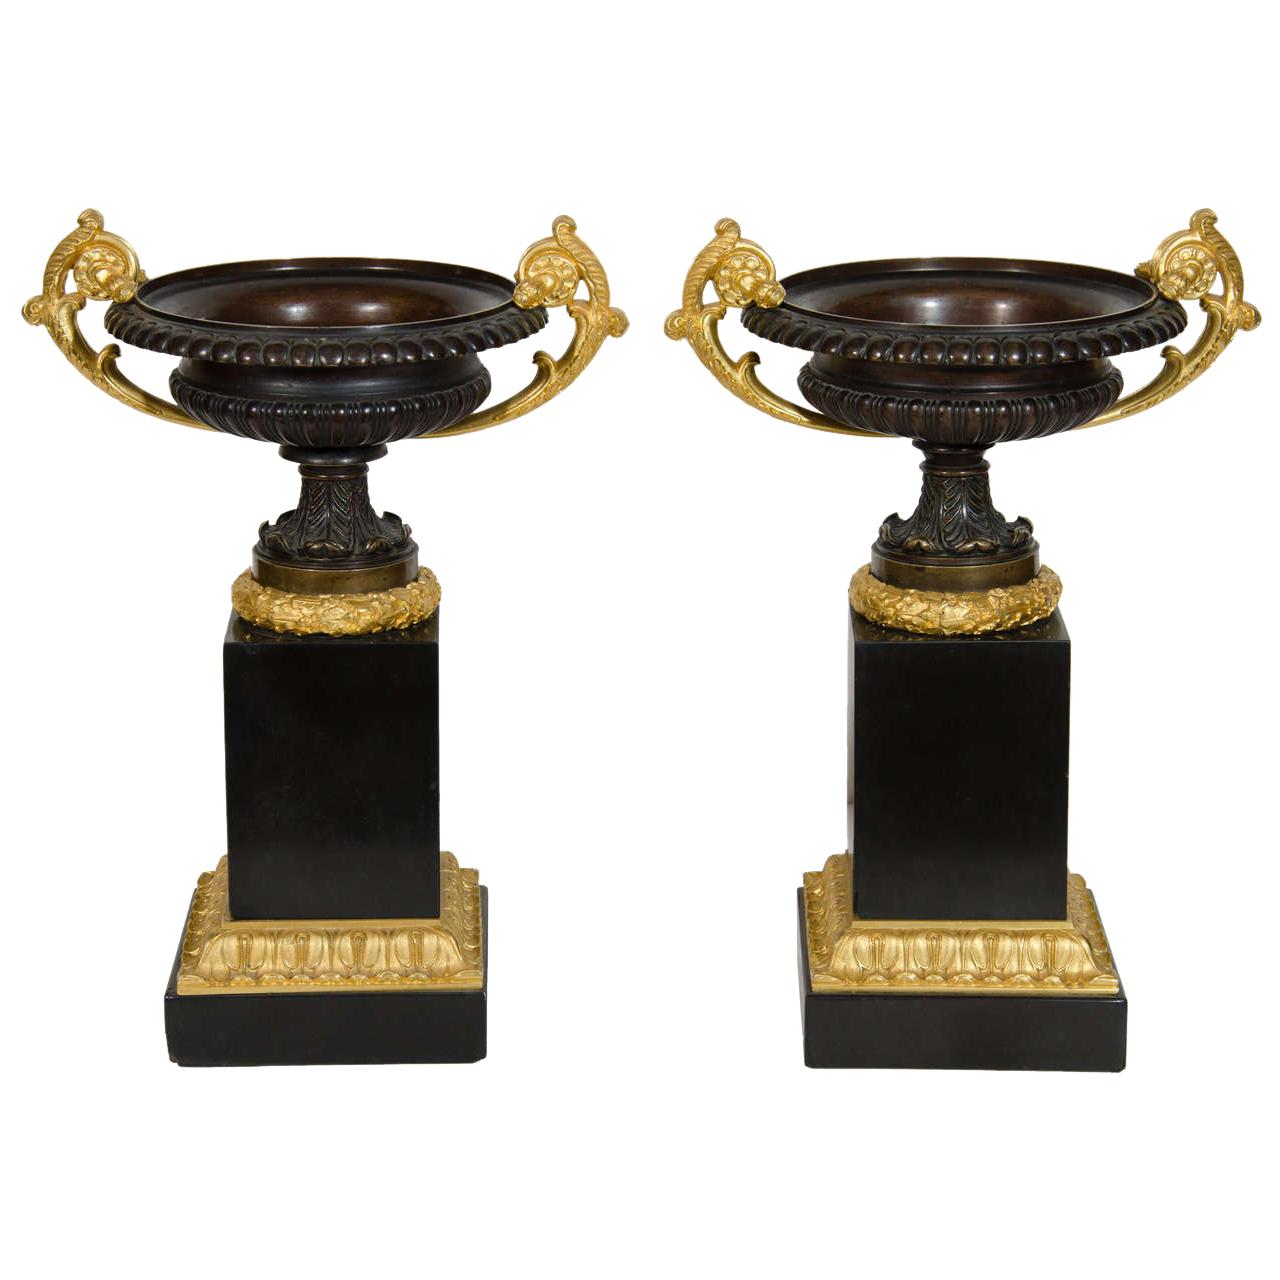 Pair of Fine Antique French Empire Gilt Bronze and Patina Bronze Urns For Sale